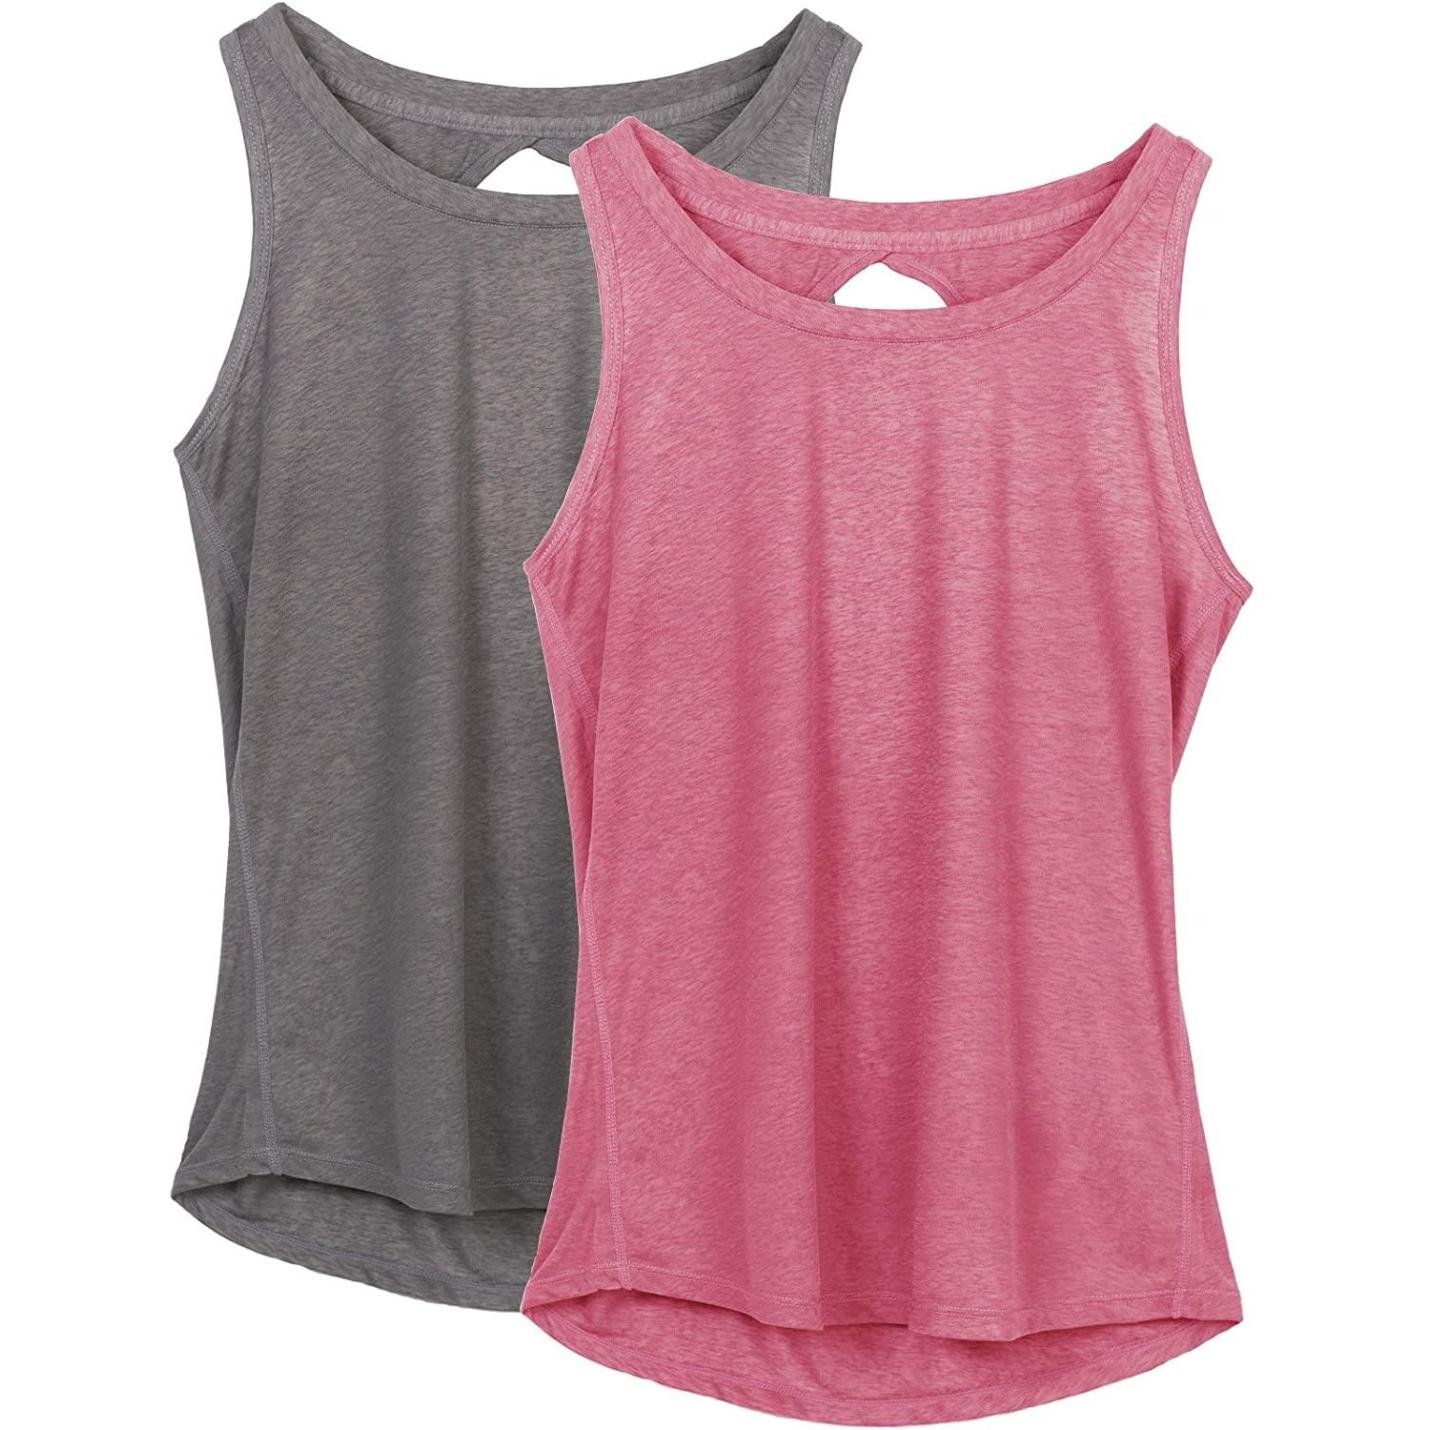 Dames Yoga Sport Tank Top Rugvrij Fitness Top Mouwloos Shirts 2 Pack S  Grijs  Sugar Coral